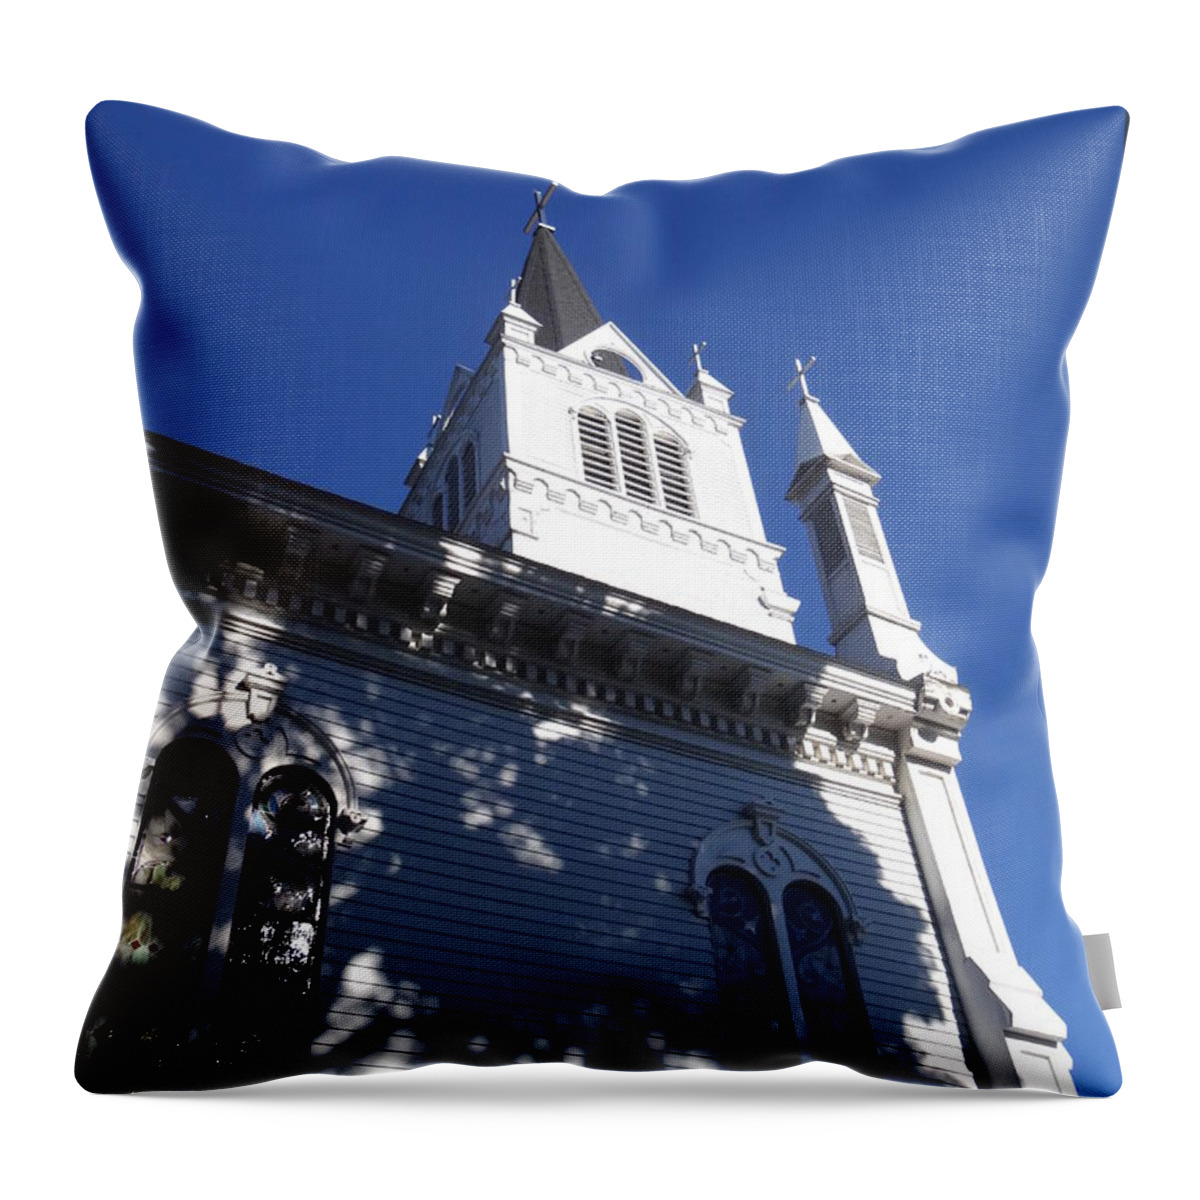 Church Throw Pillow featuring the photograph Ste. Anne Catholic Church Tower by Keith Stokes